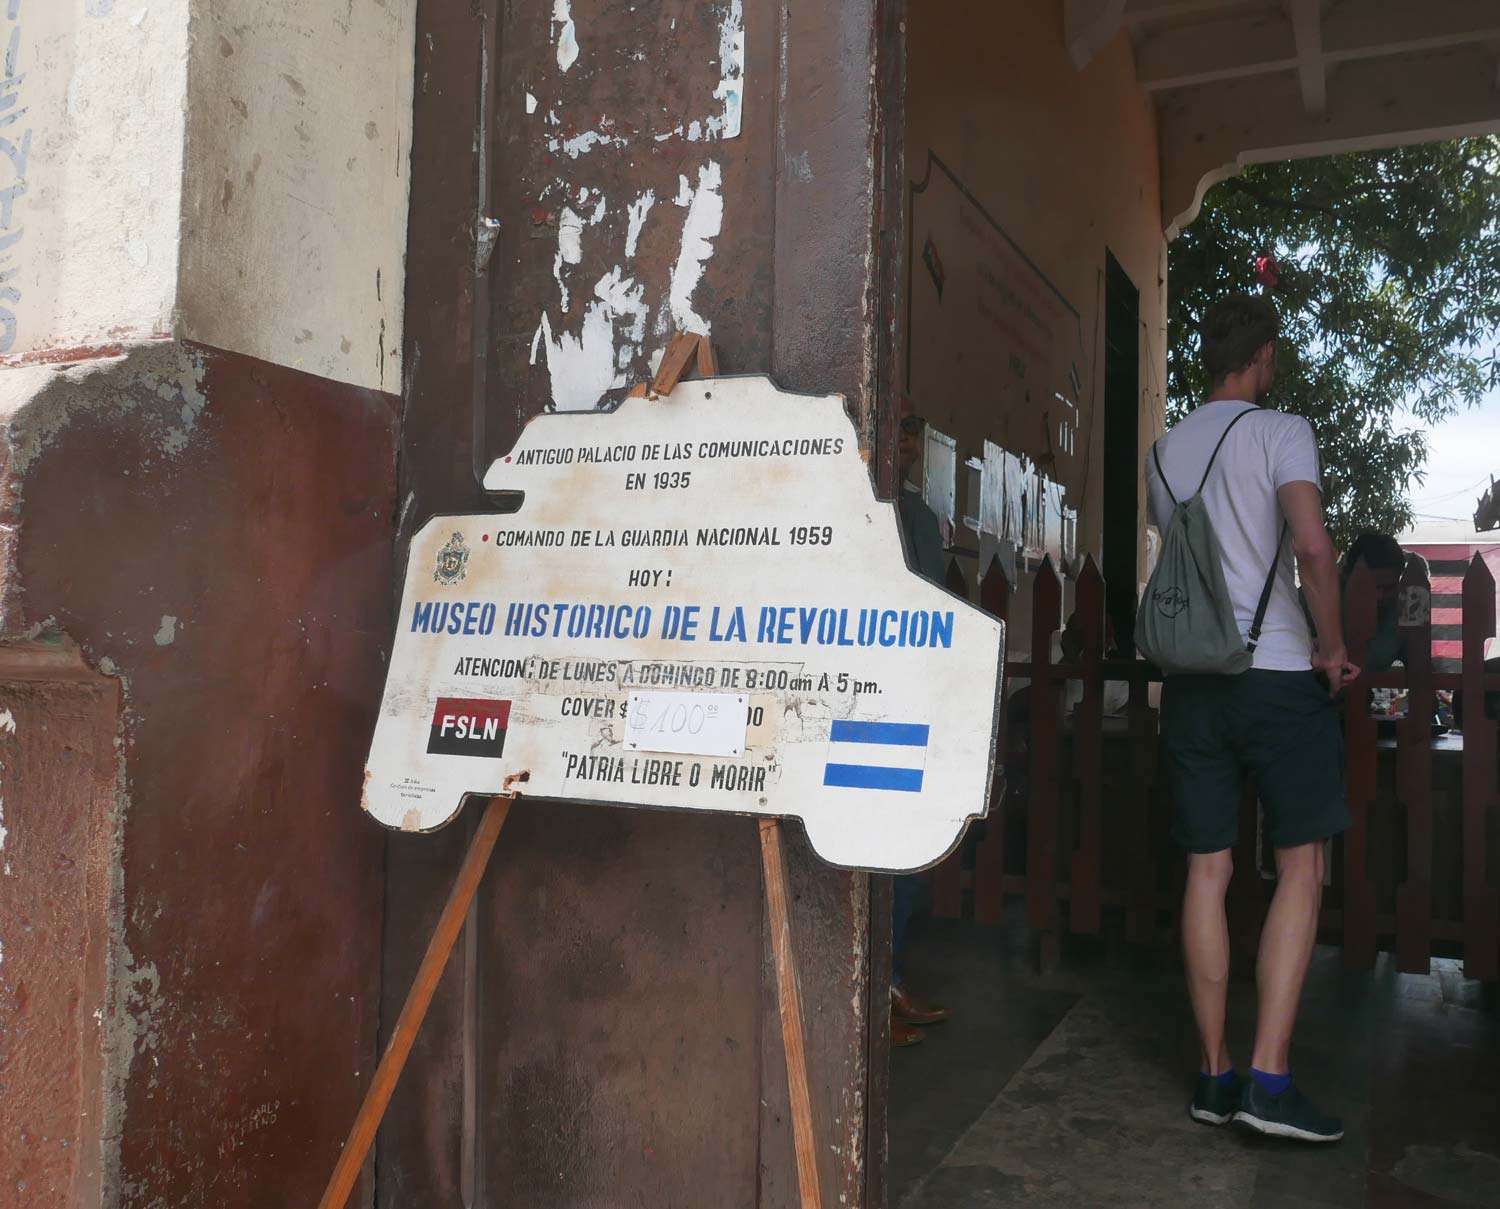 Entrance to Revolution museum in Leon, Nicaragua